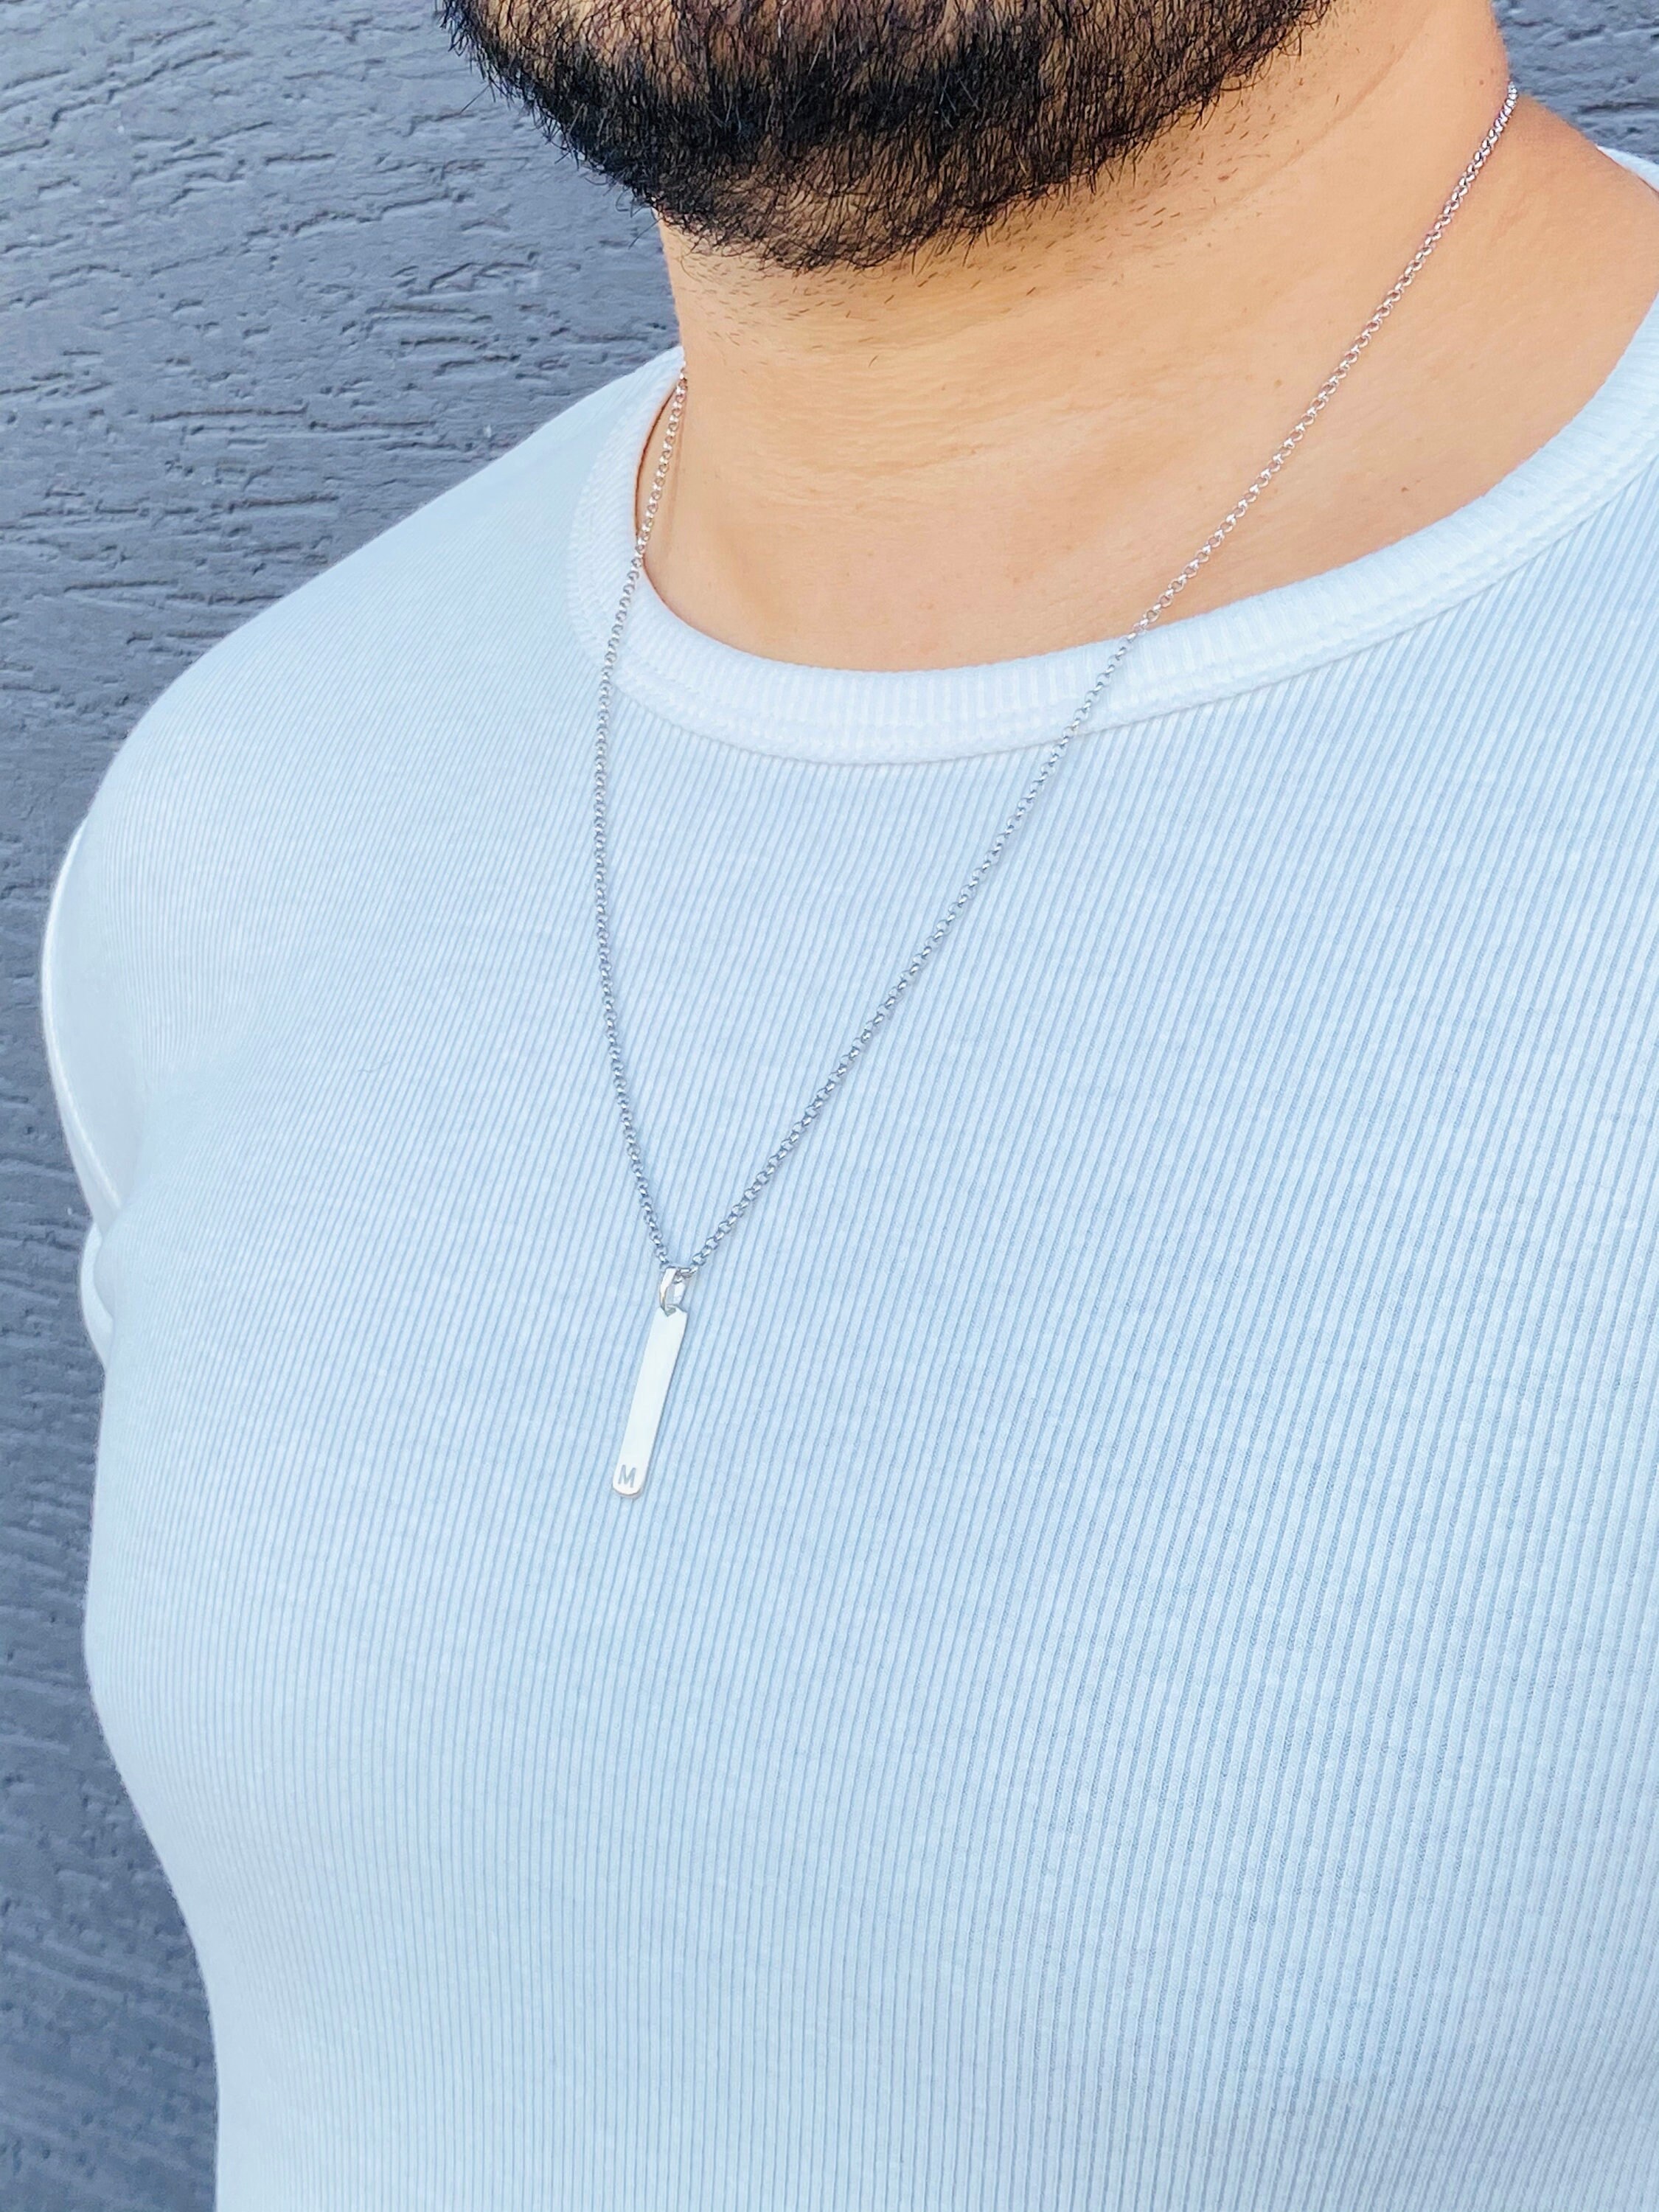 Hexa Bar Name Necklace for Men - Sterling Silver / Black Cord